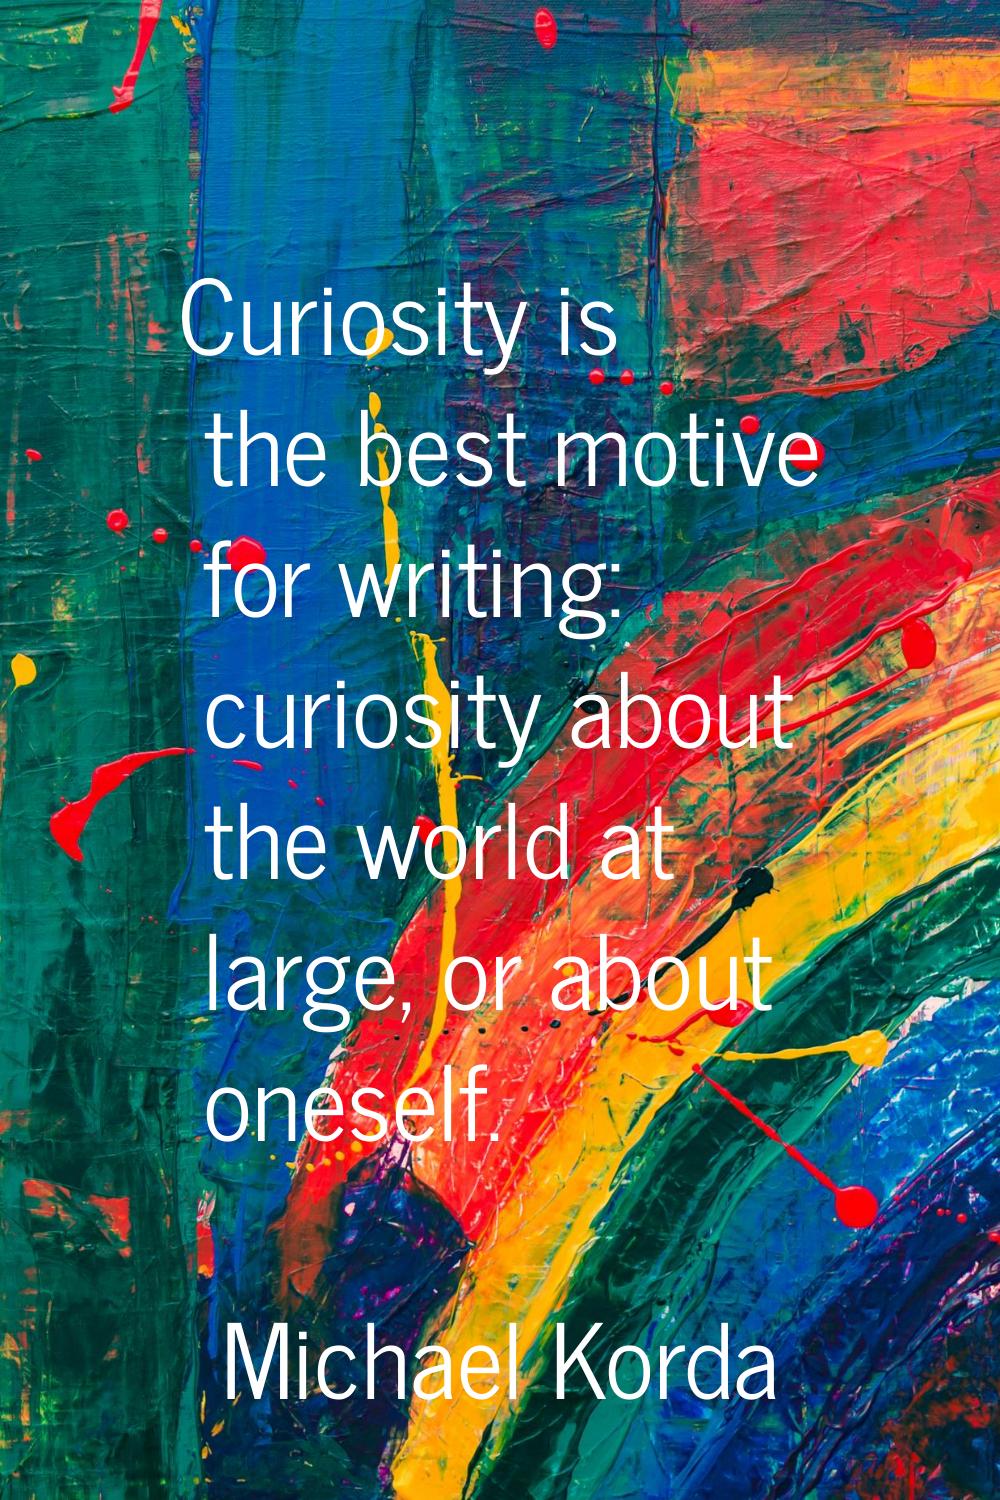 Curiosity is the best motive for writing: curiosity about the world at large, or about oneself.